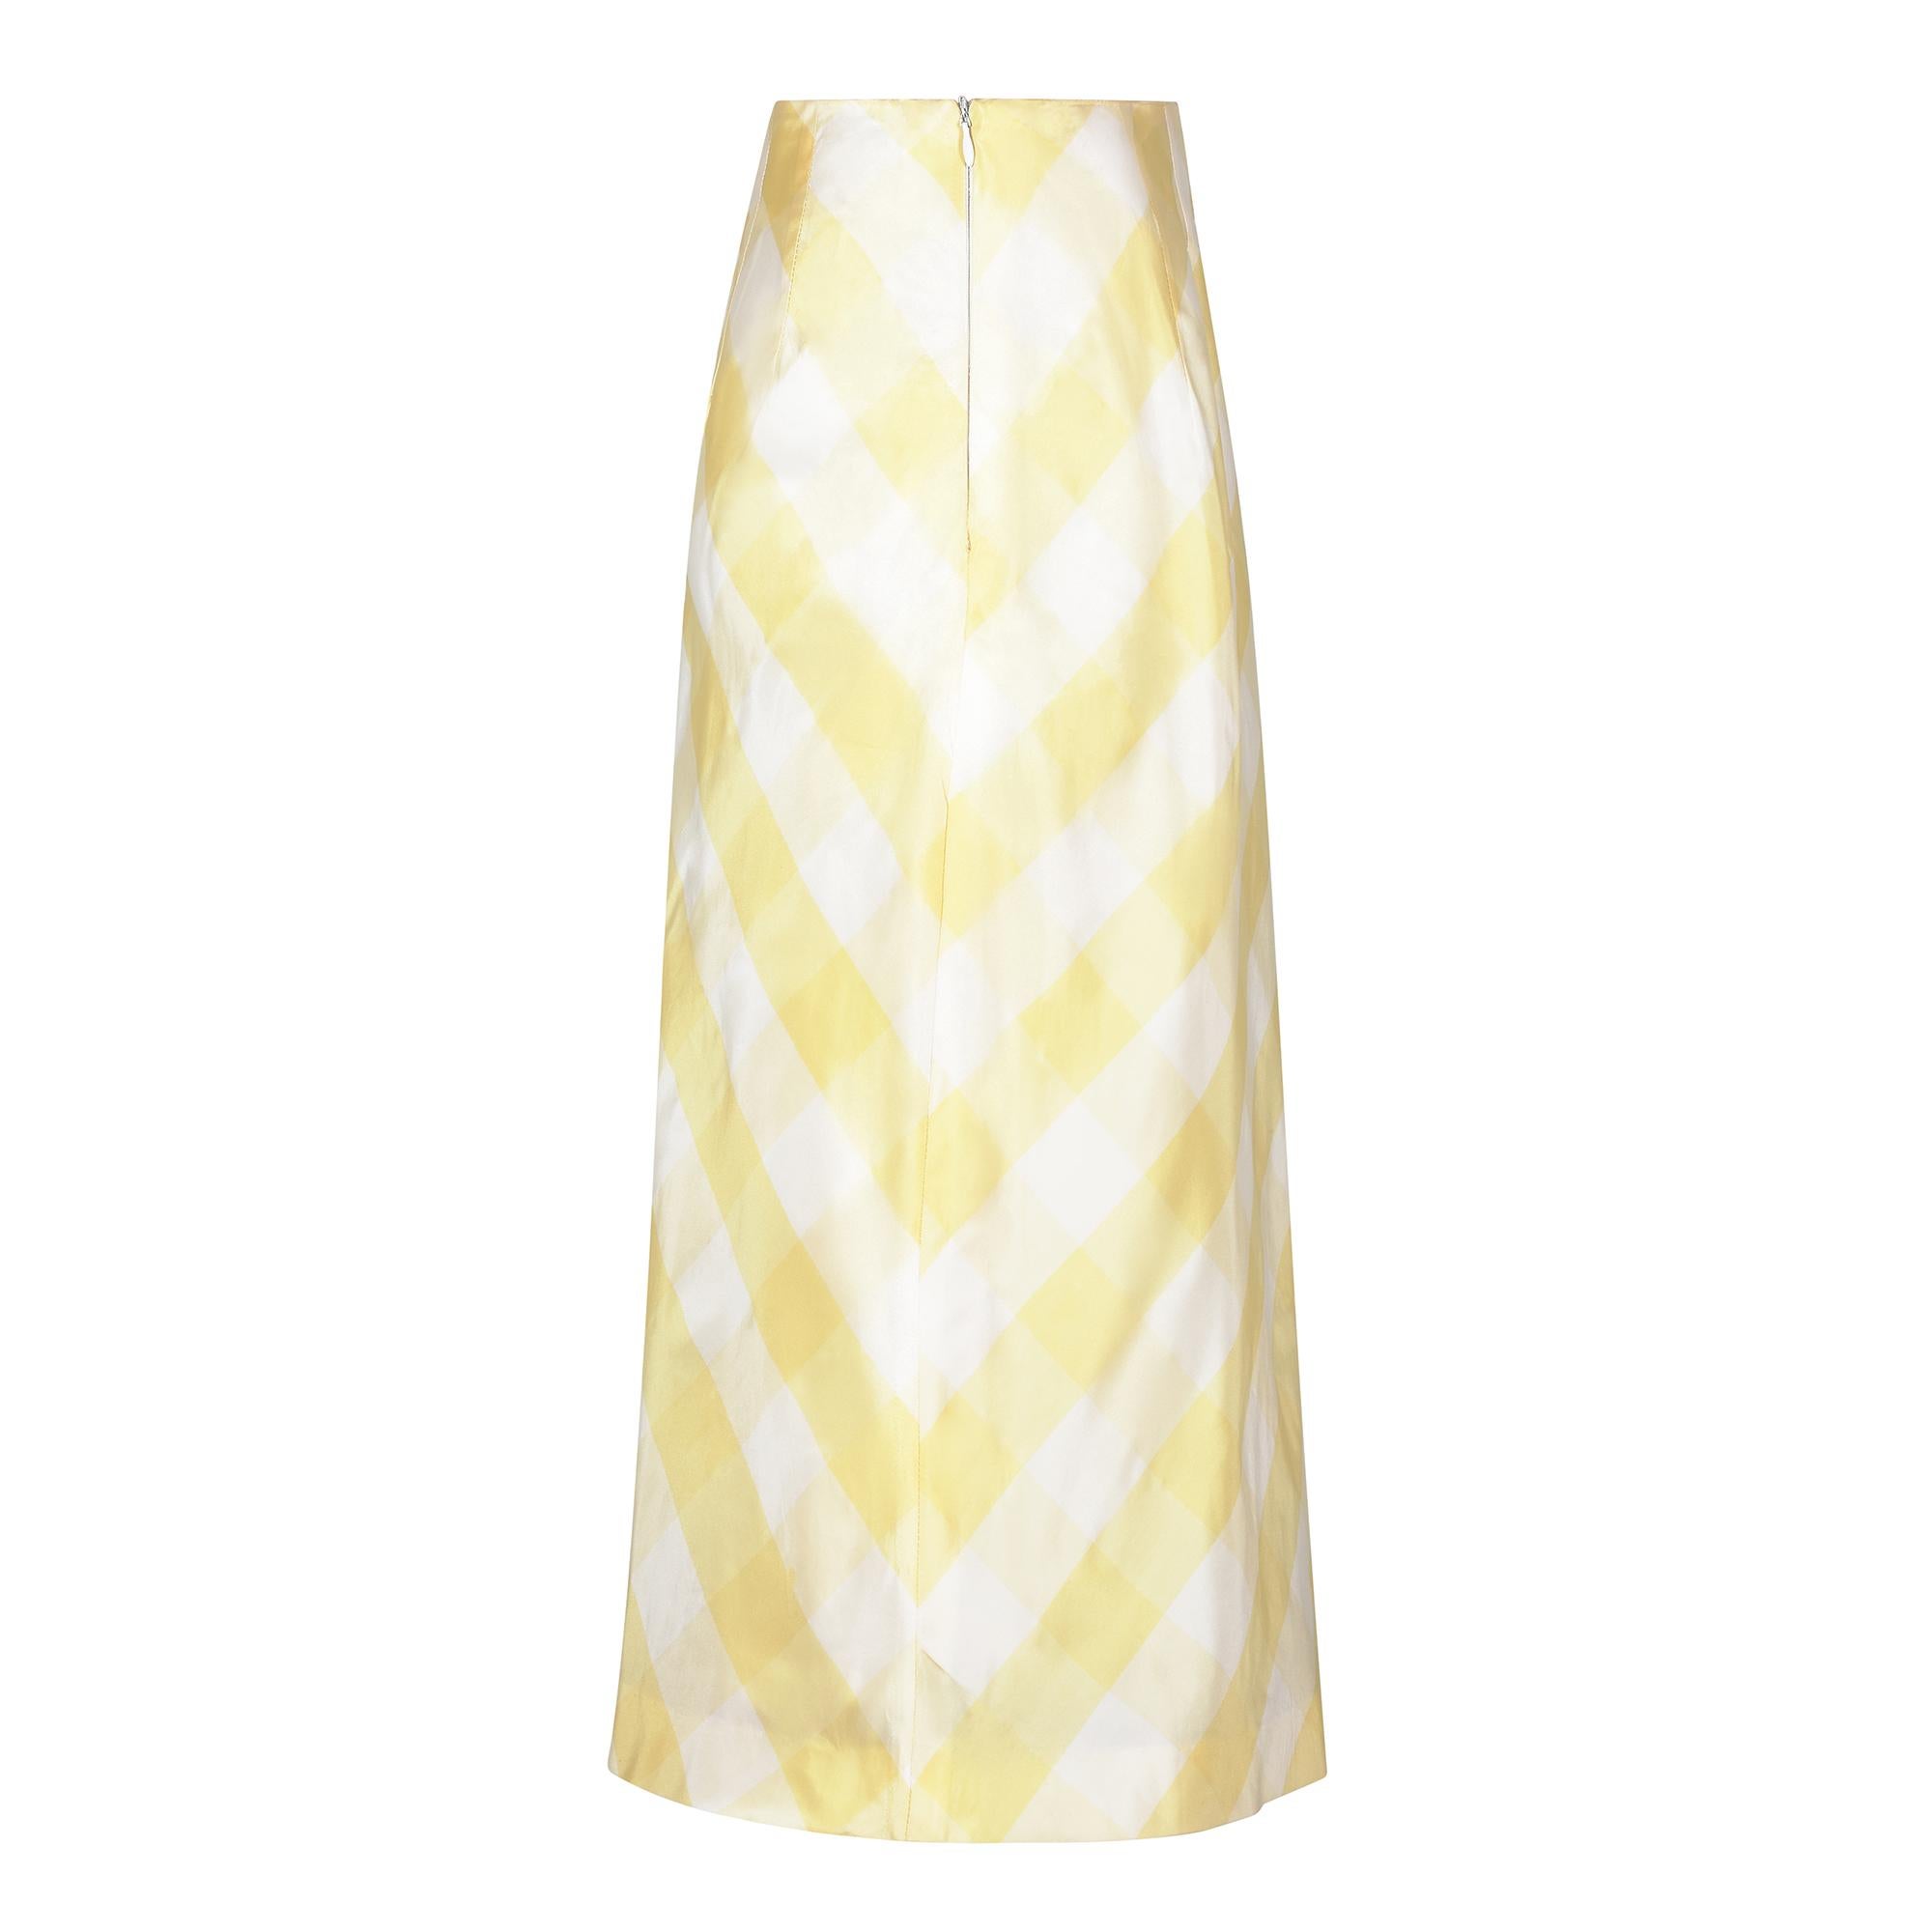 This 1990s Chloe silk taffeta yellow gingham print skirt was very likely made by Karl Lagerfeld who worked extensively with Chloe throughout the 1960s and 1970s and again in the 1990s. The skirt is a large square check or gingham pattern in lemon